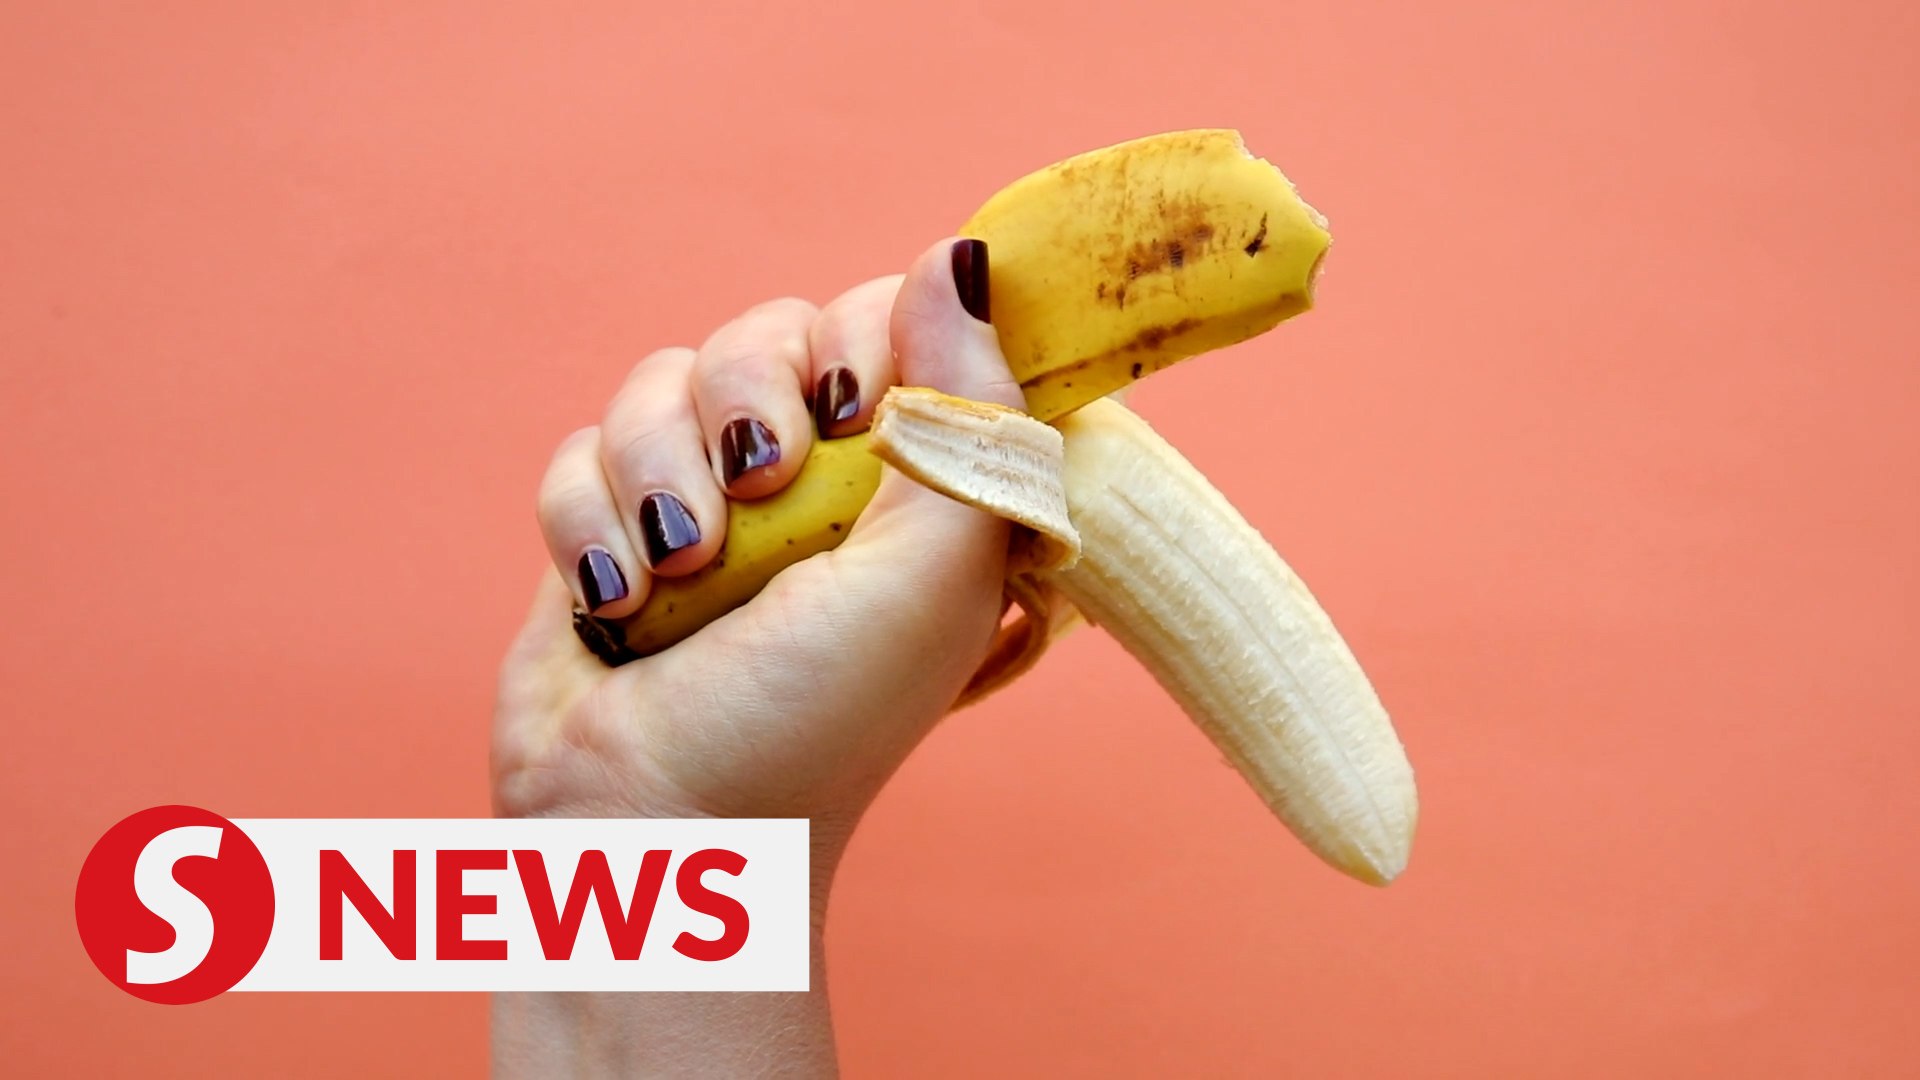 doug rowell recommends how to masterbate with a bannana pic